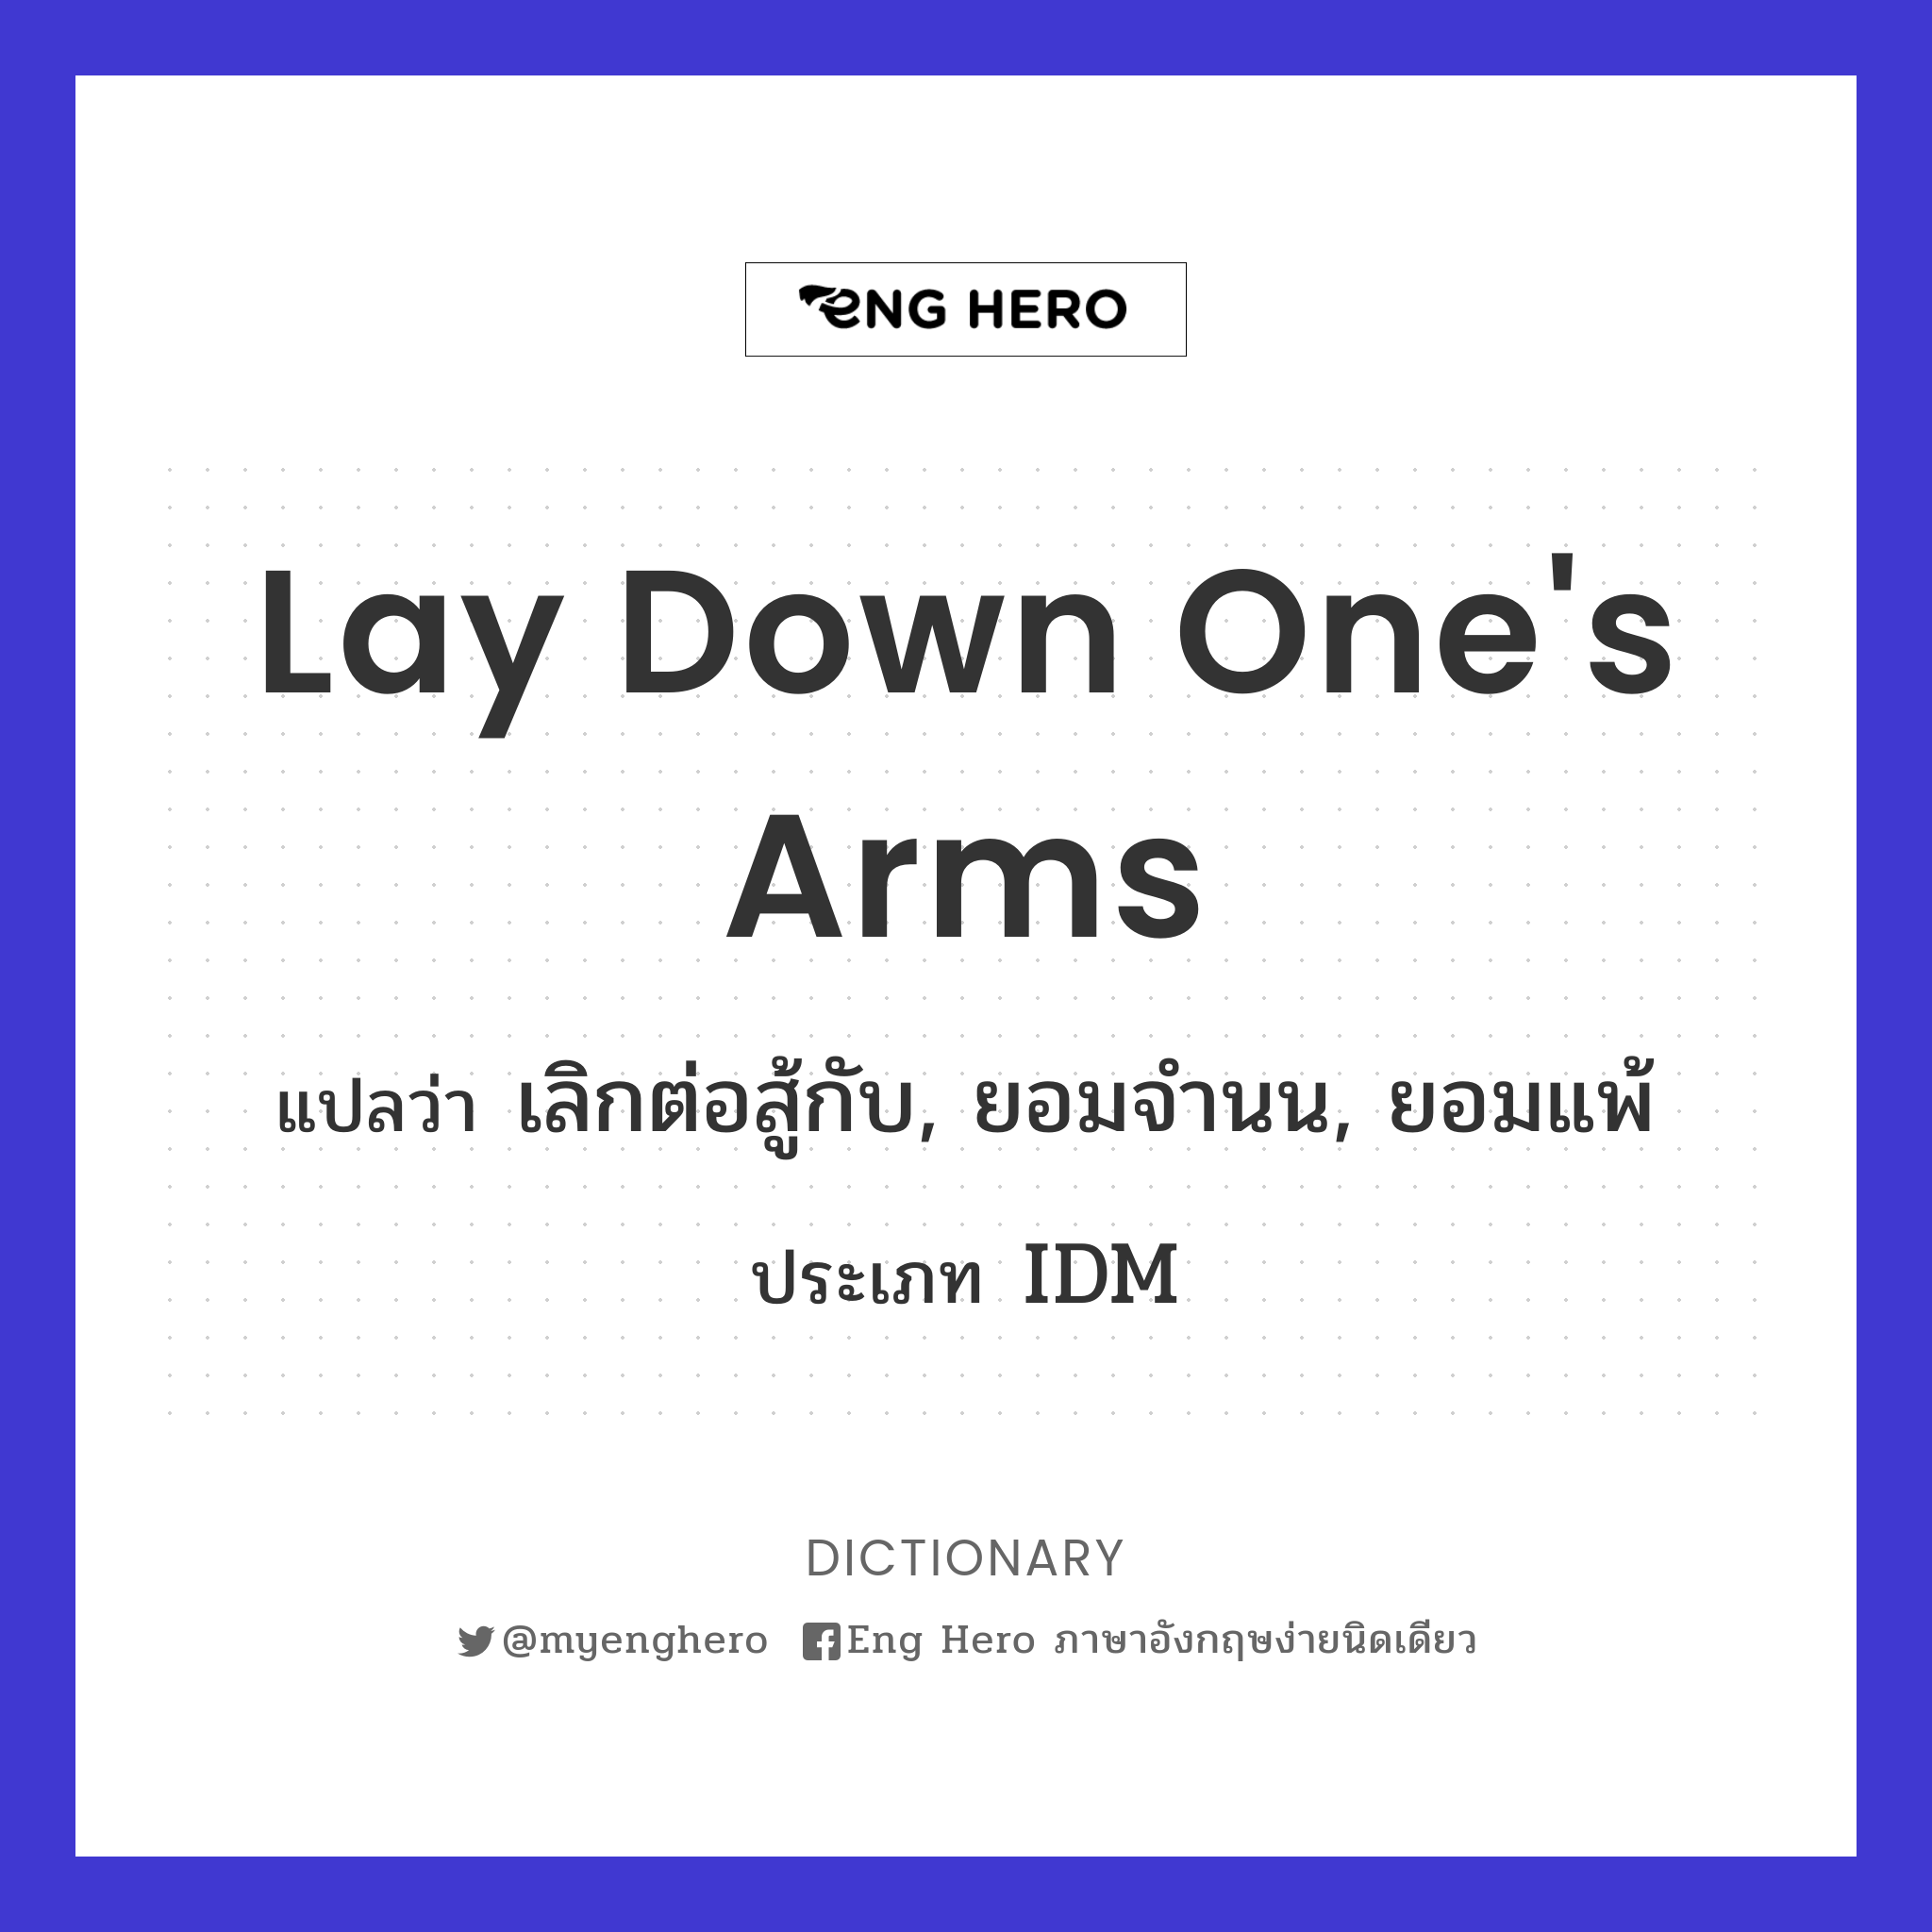 lay down one's arms